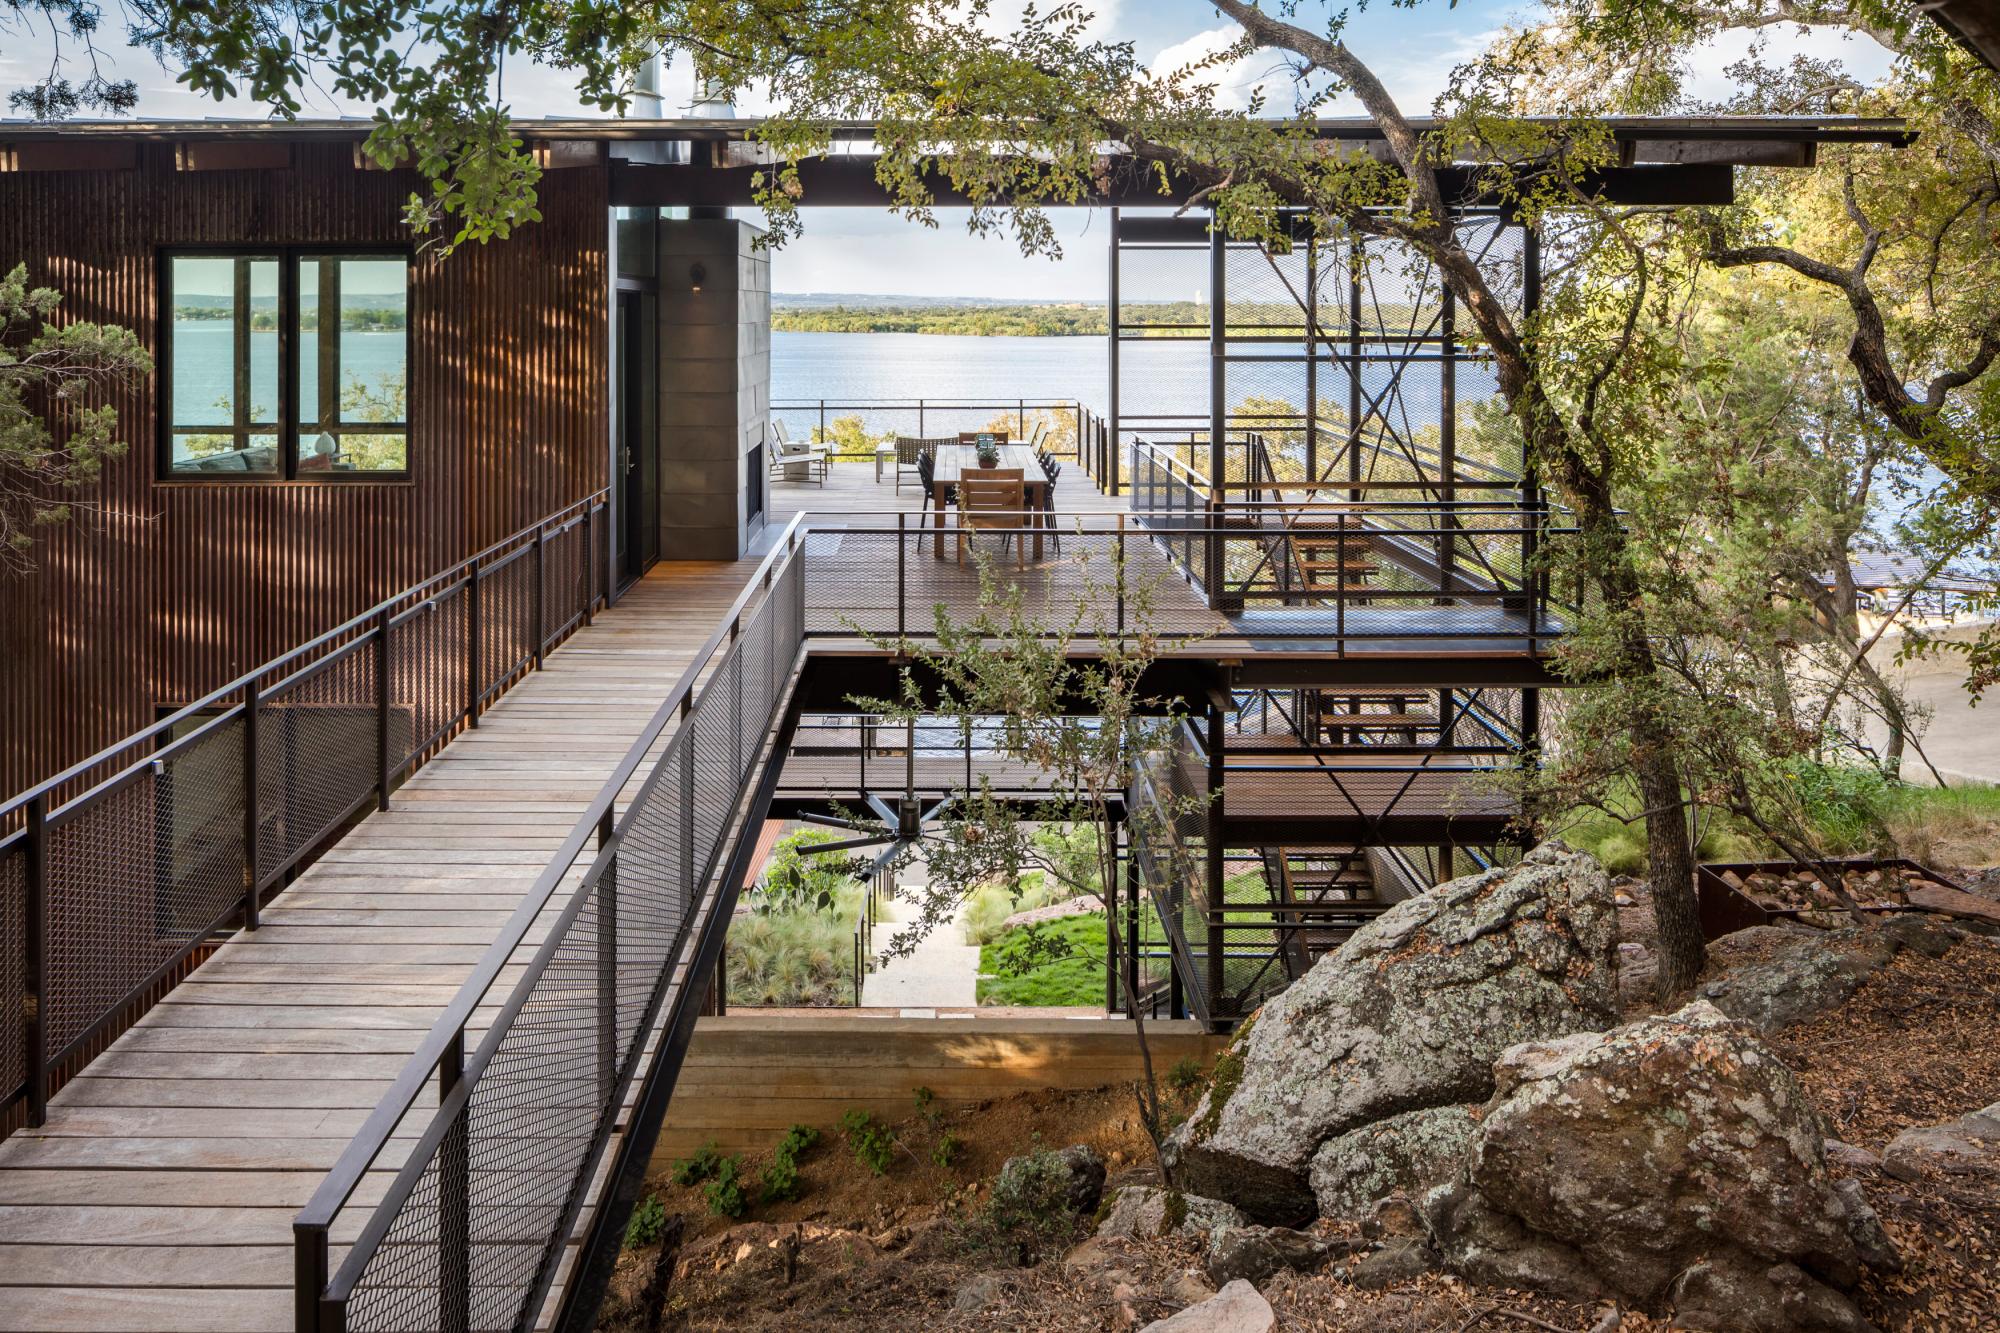 An award winning lake house featuring a bridge that anchors the home into the hillside, connecting it to the surrounding landscape.